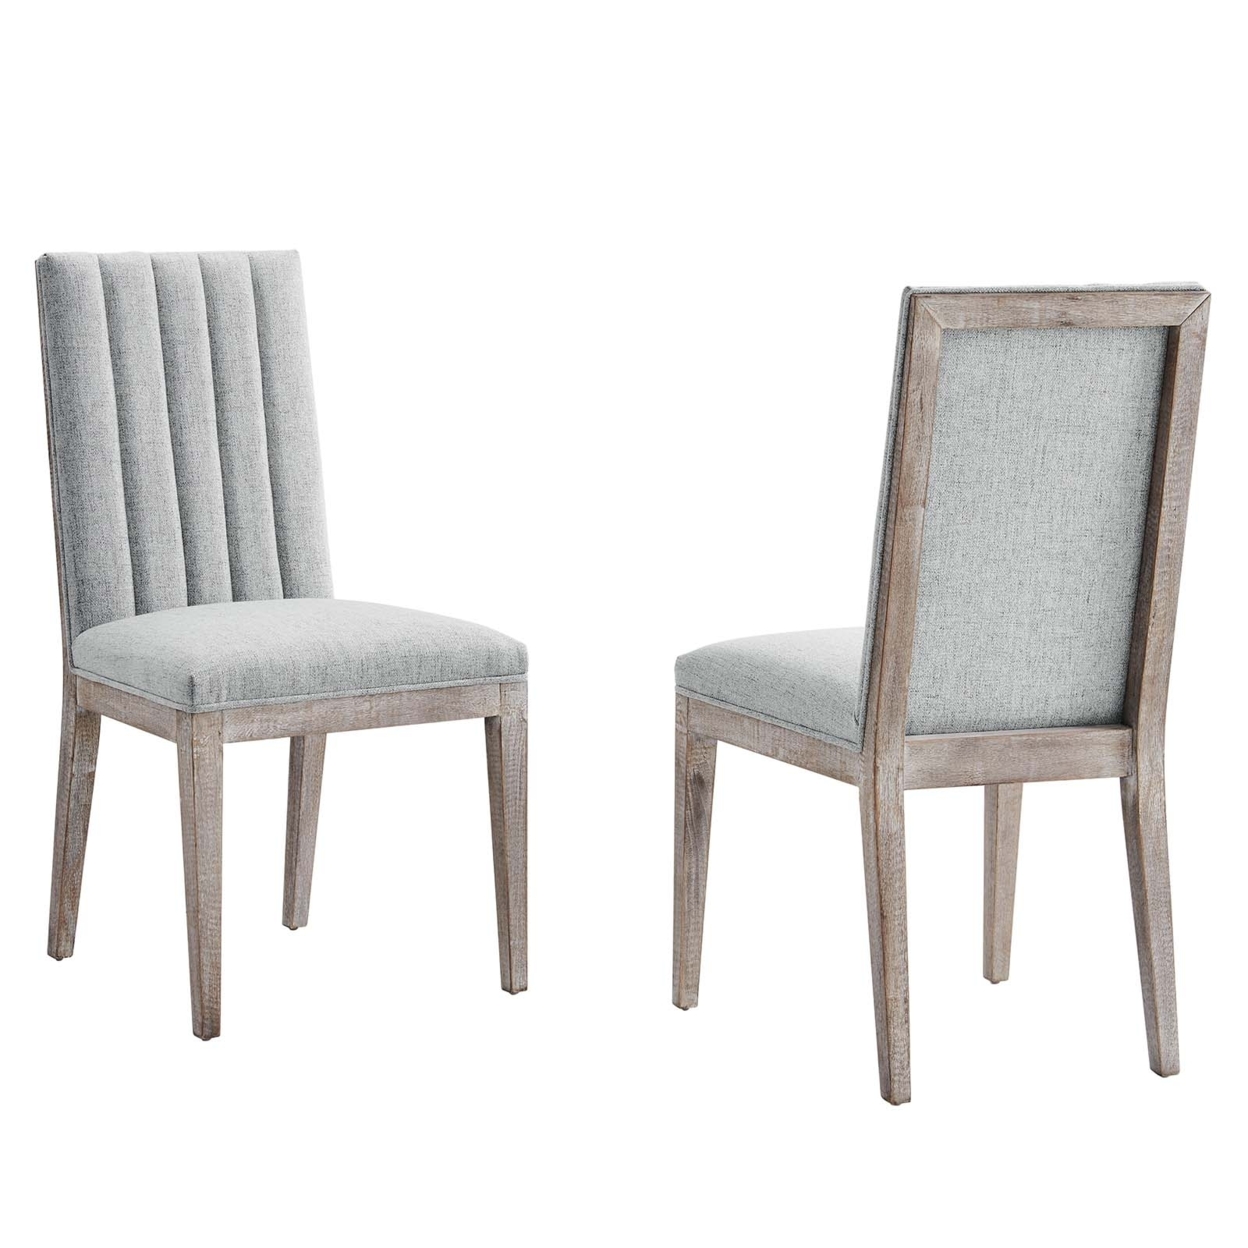 Maisonette French Vintage Tufted Fabric Dining Side Chairs Set Of 2, Light Gray